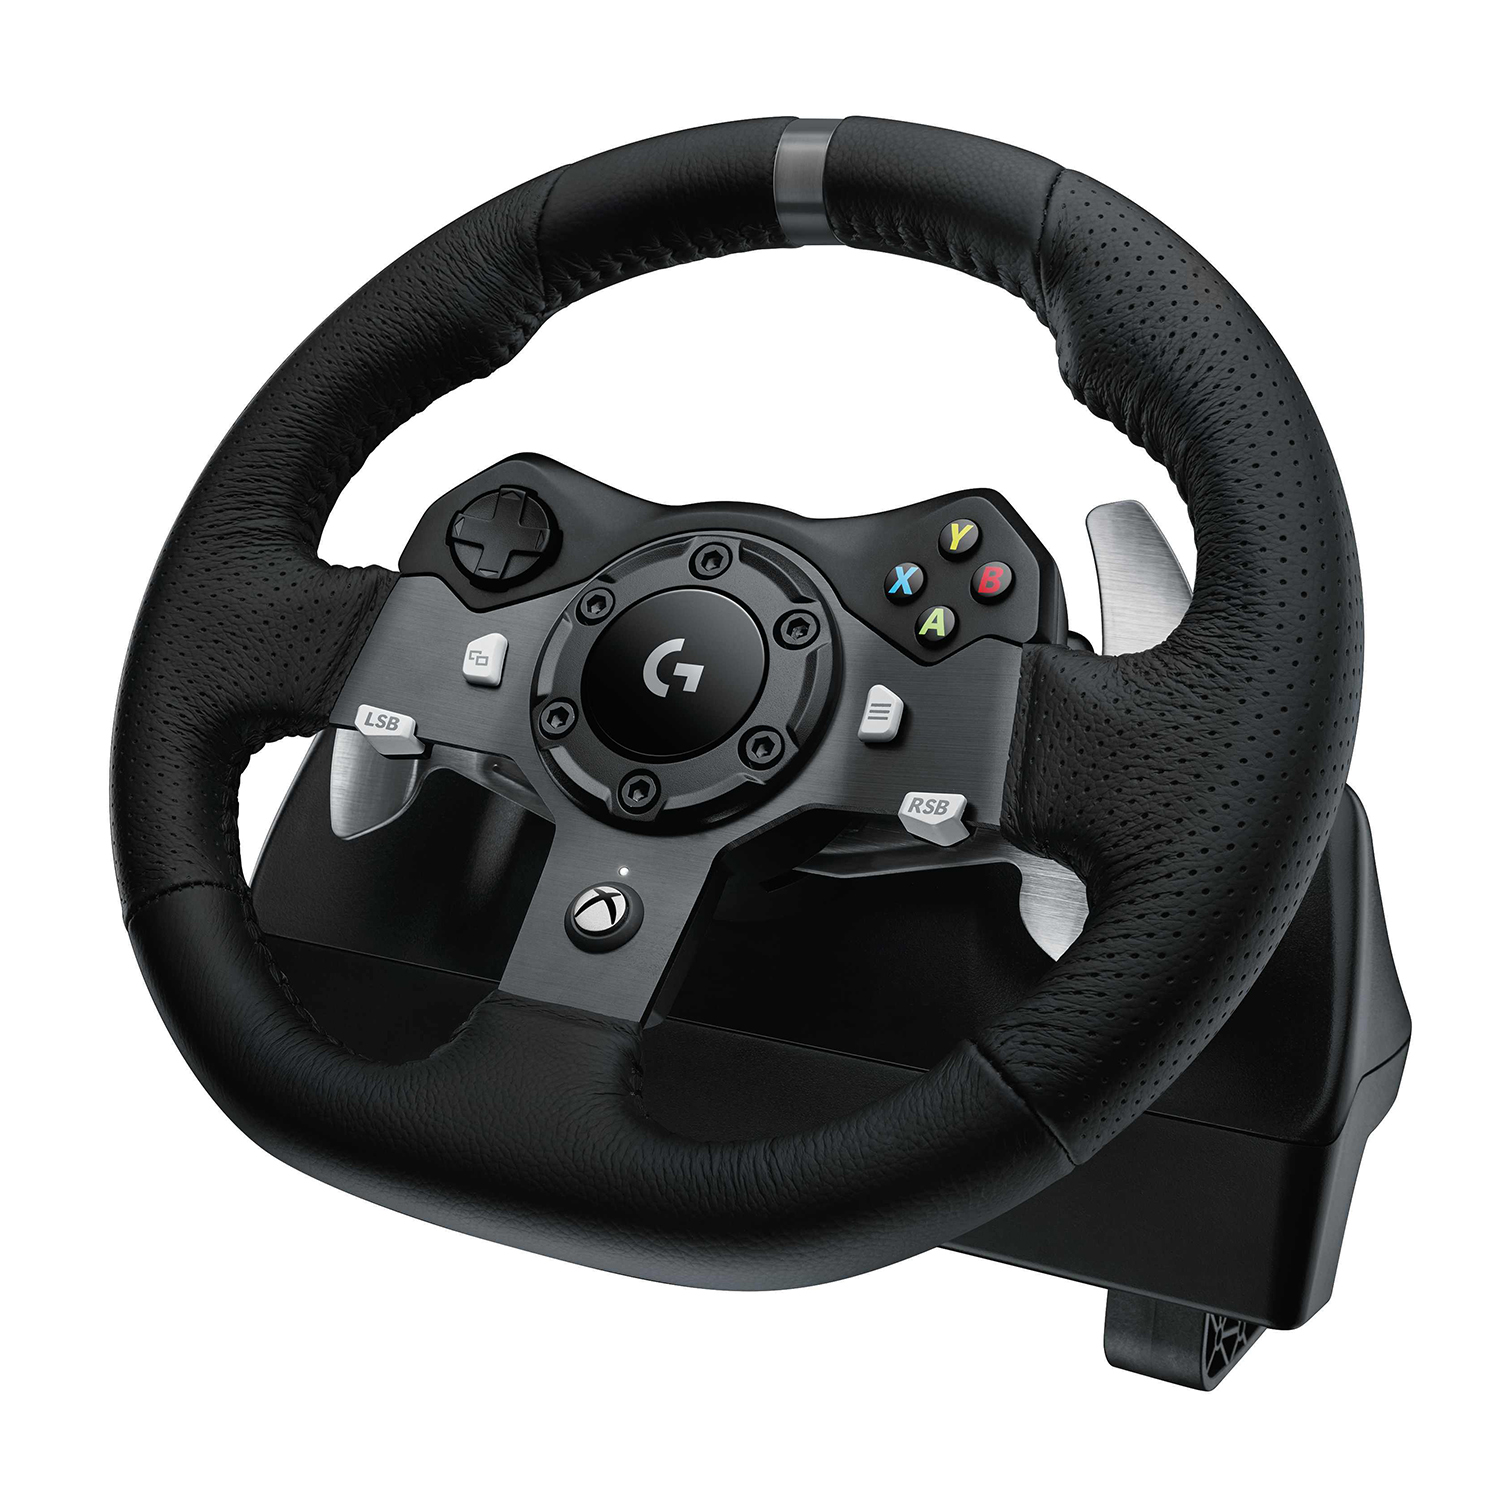 Logitech G920 Driving Force Racing Wheel and Floor Pedals for Xbox Series X|S, Xbox One, PC, Mac, Black - image 2 of 3